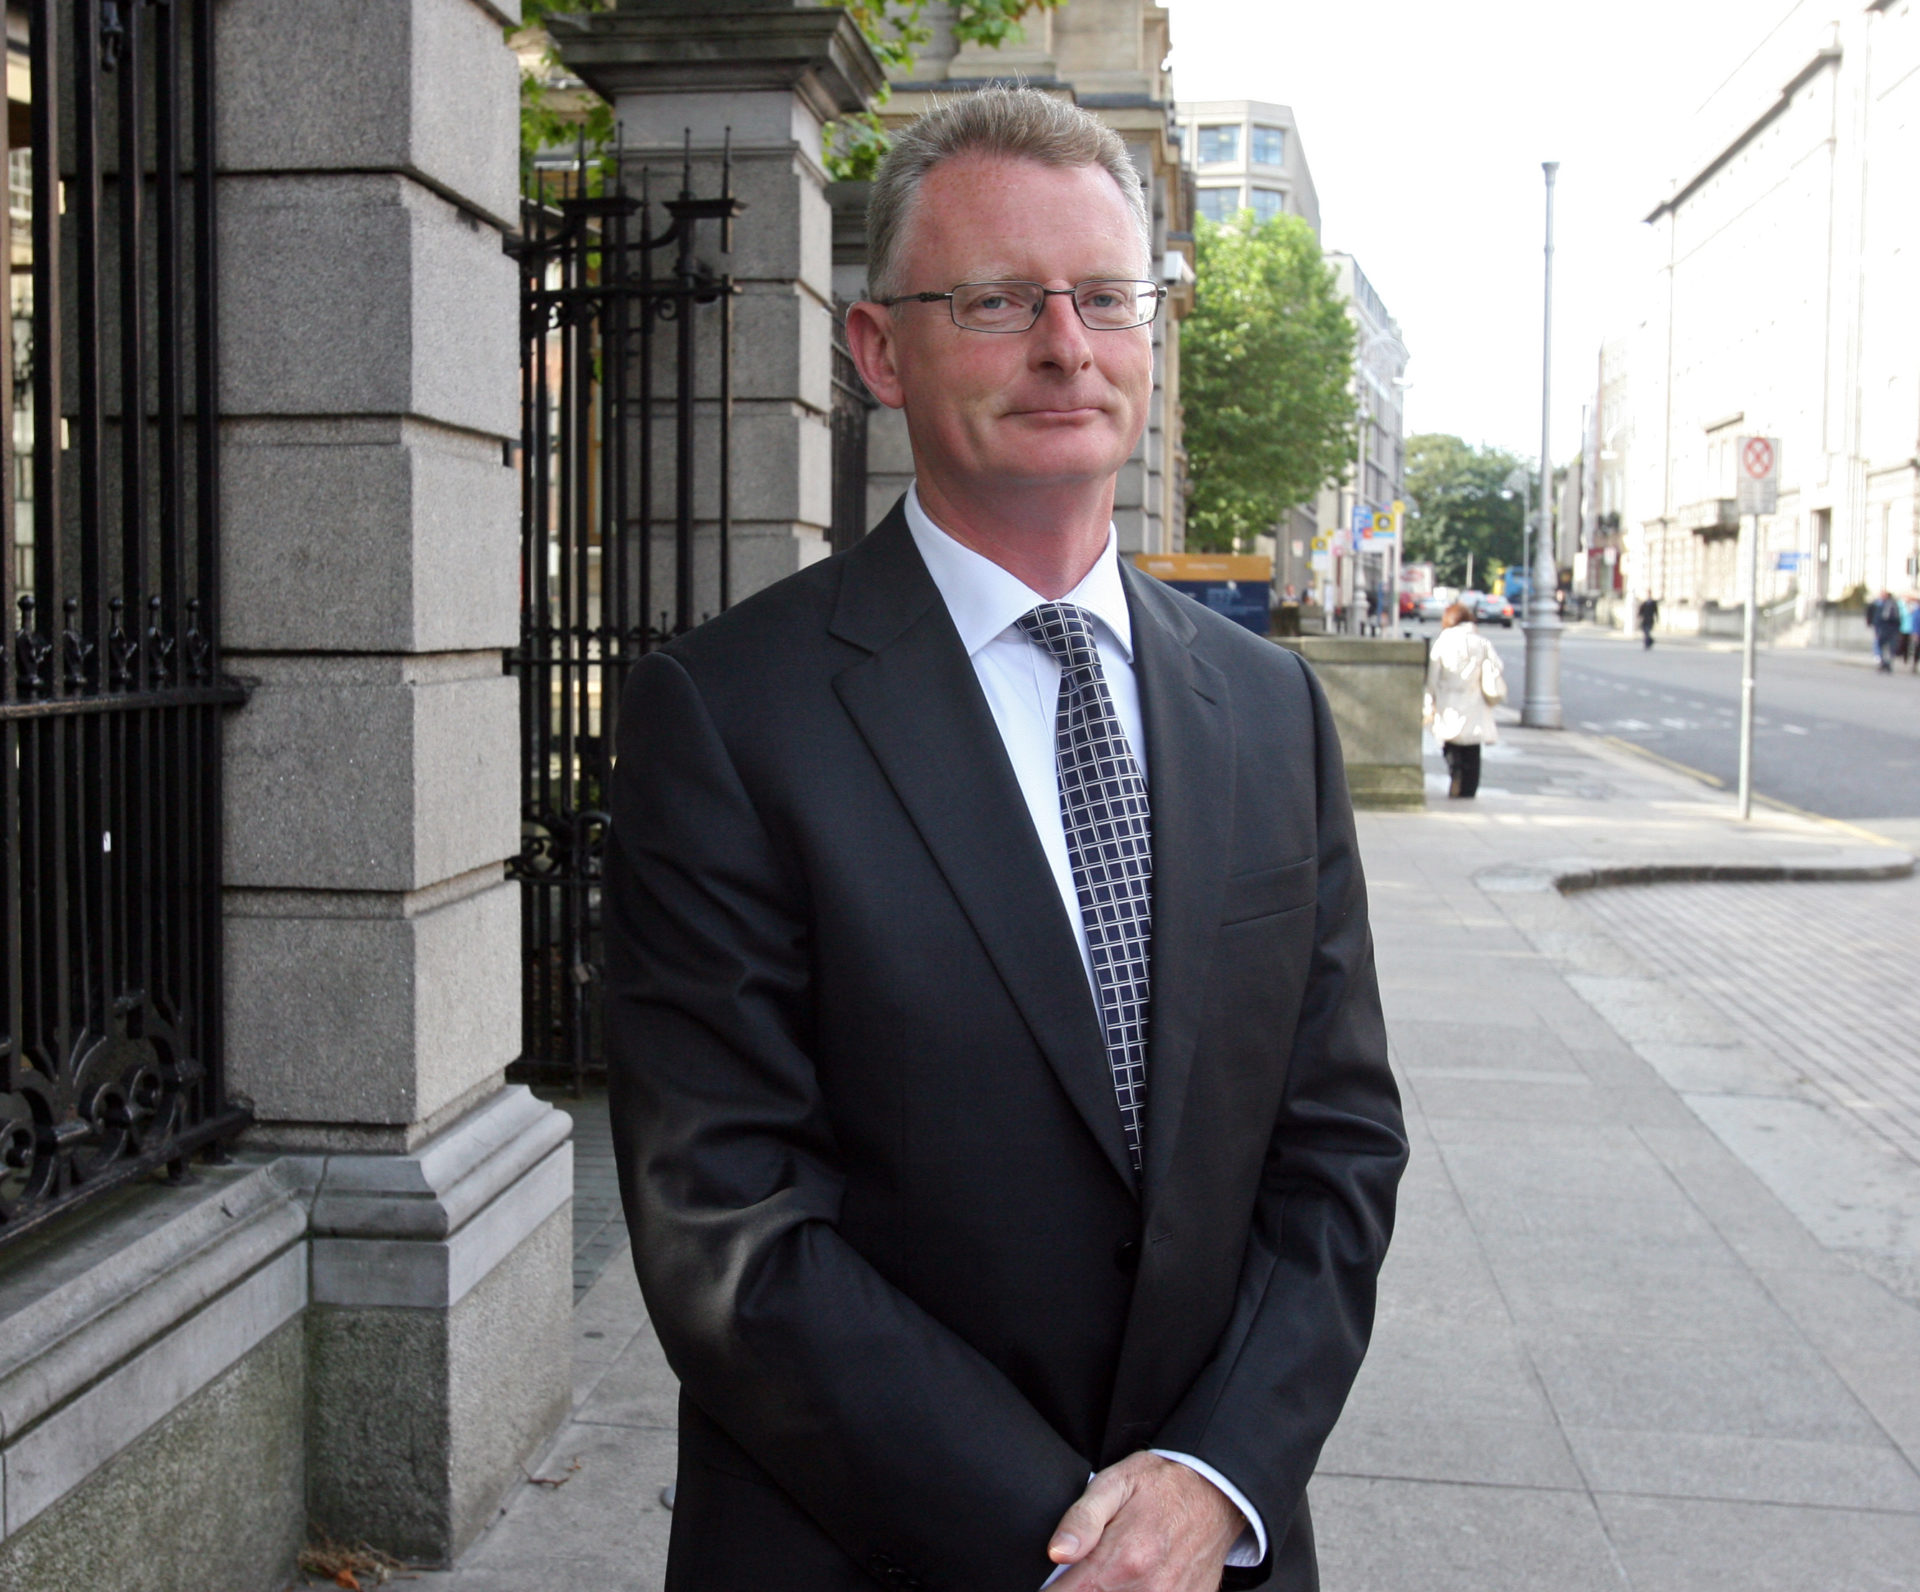 The Chambers Ireland CEO Ian Talbot outside Leinster House, 29-07-2009. Image: James Horan/RollingNews